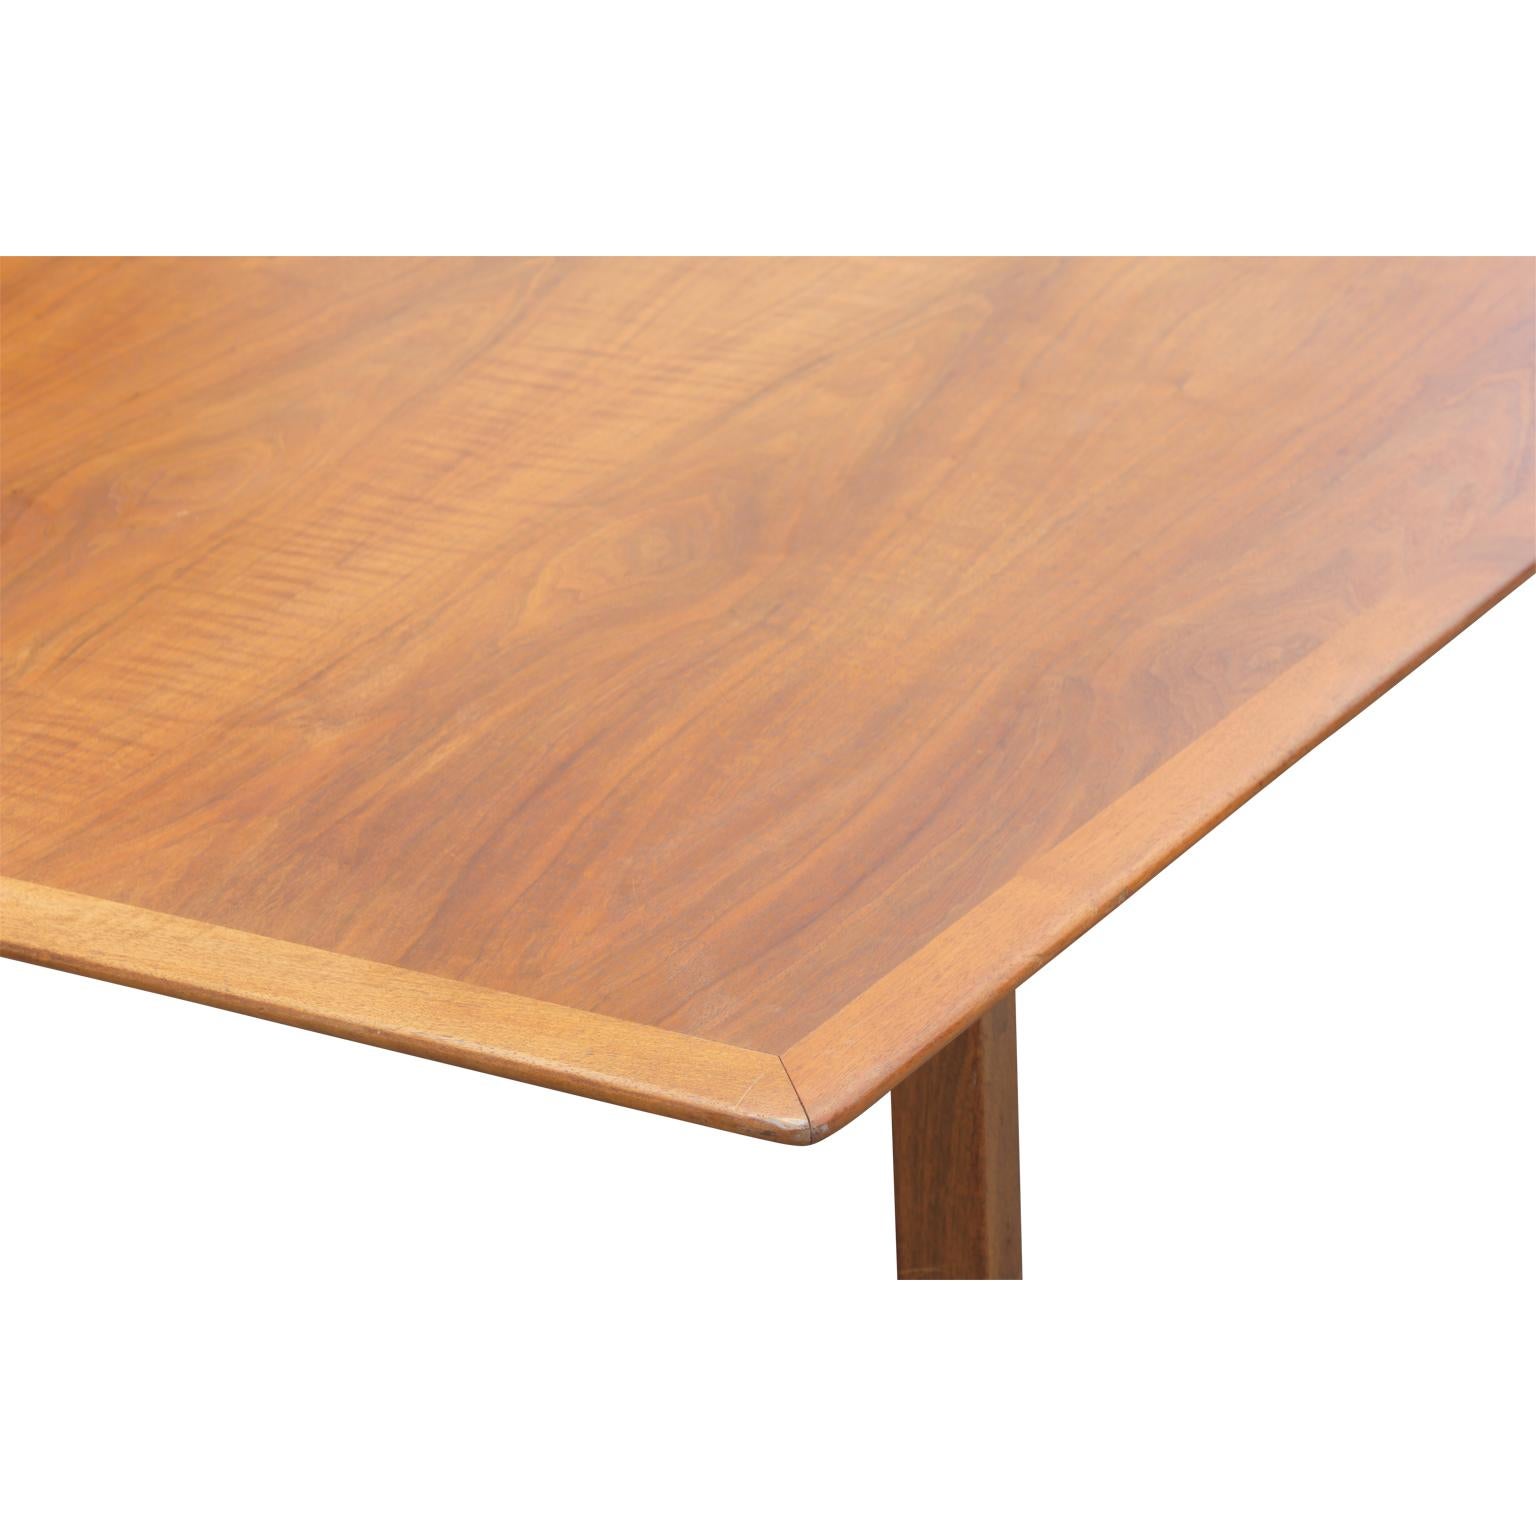 Mid-20th Century Custom Long Walnut Dining Conference Table Designed by Florence Knoll